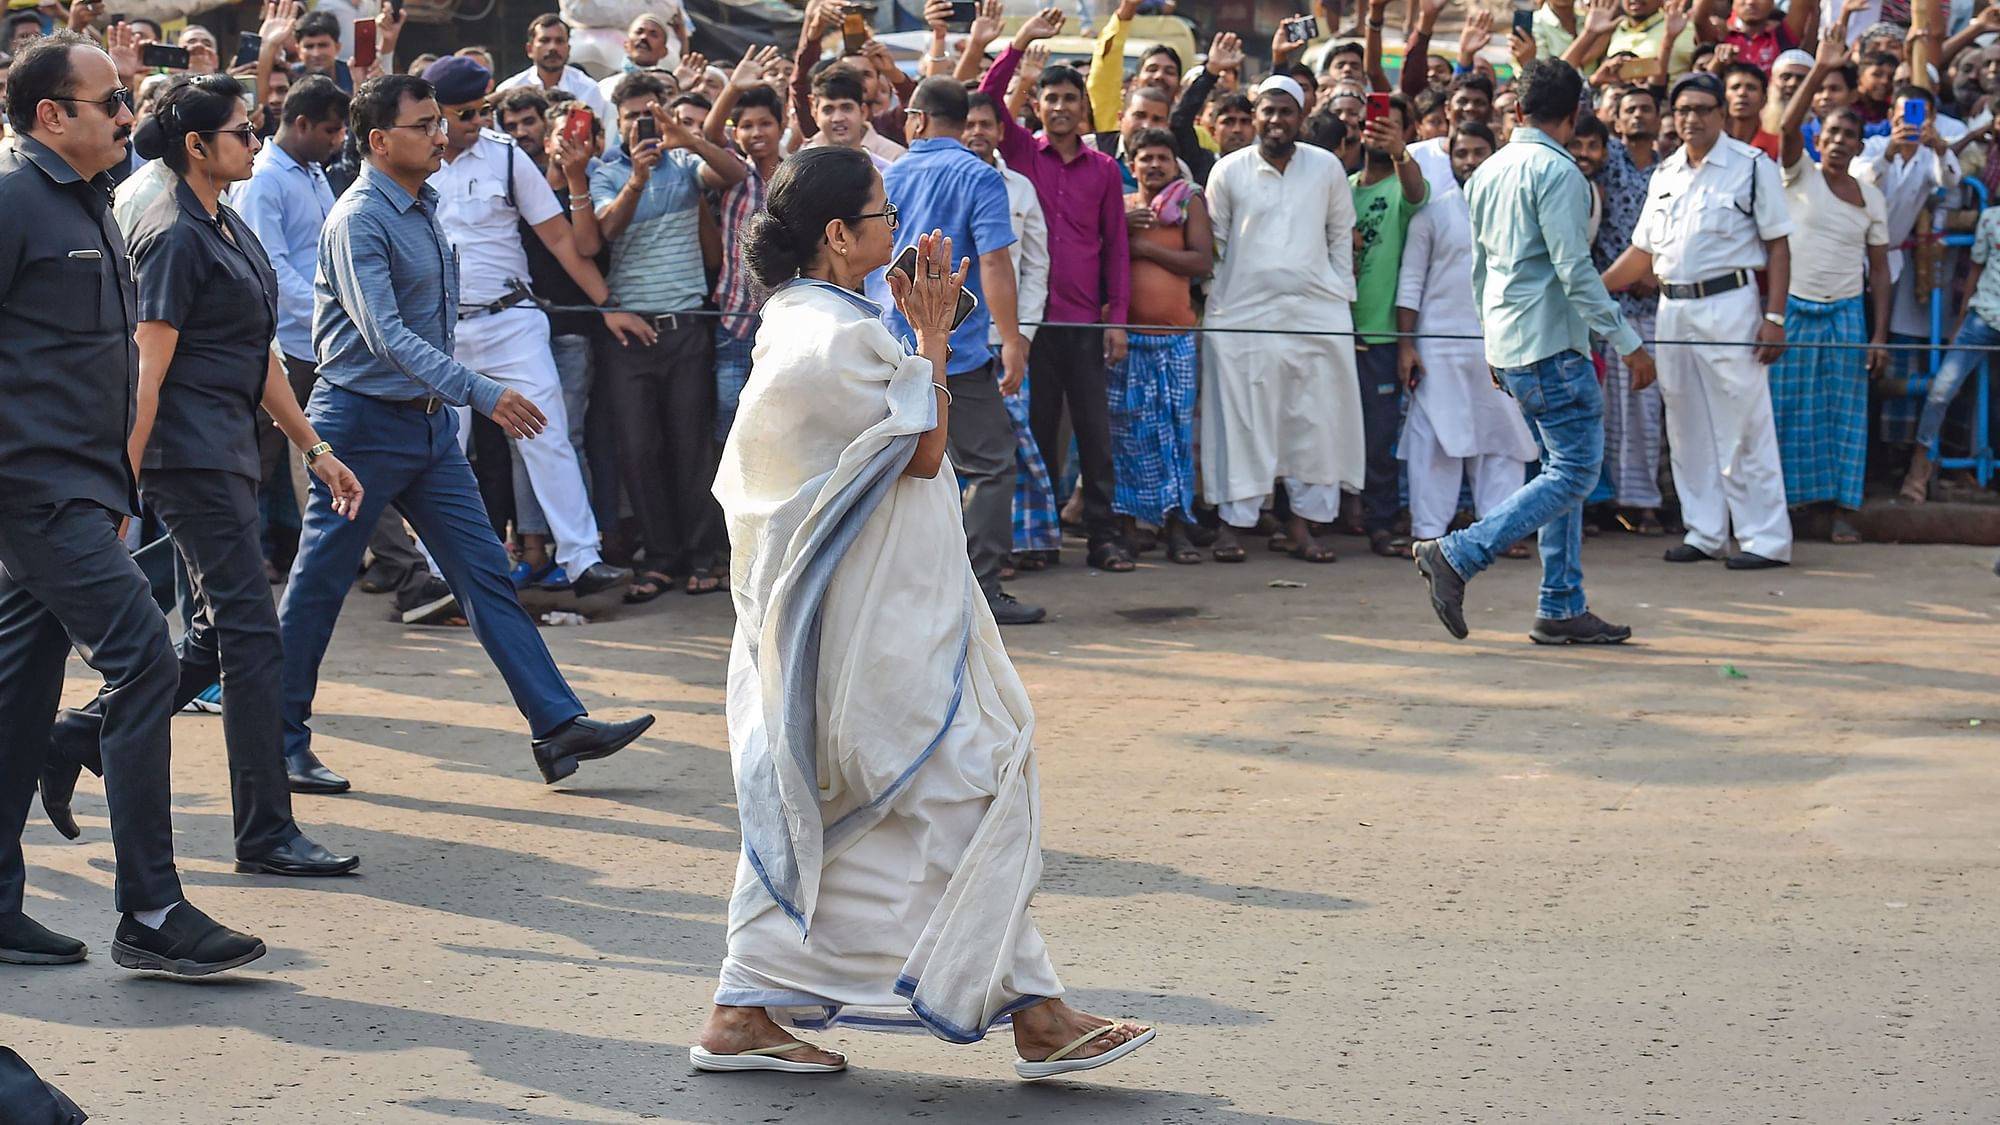 Chief minister Mamata Banerjee on Monday dared the BJP-led Centre to topple her government and imprison her.